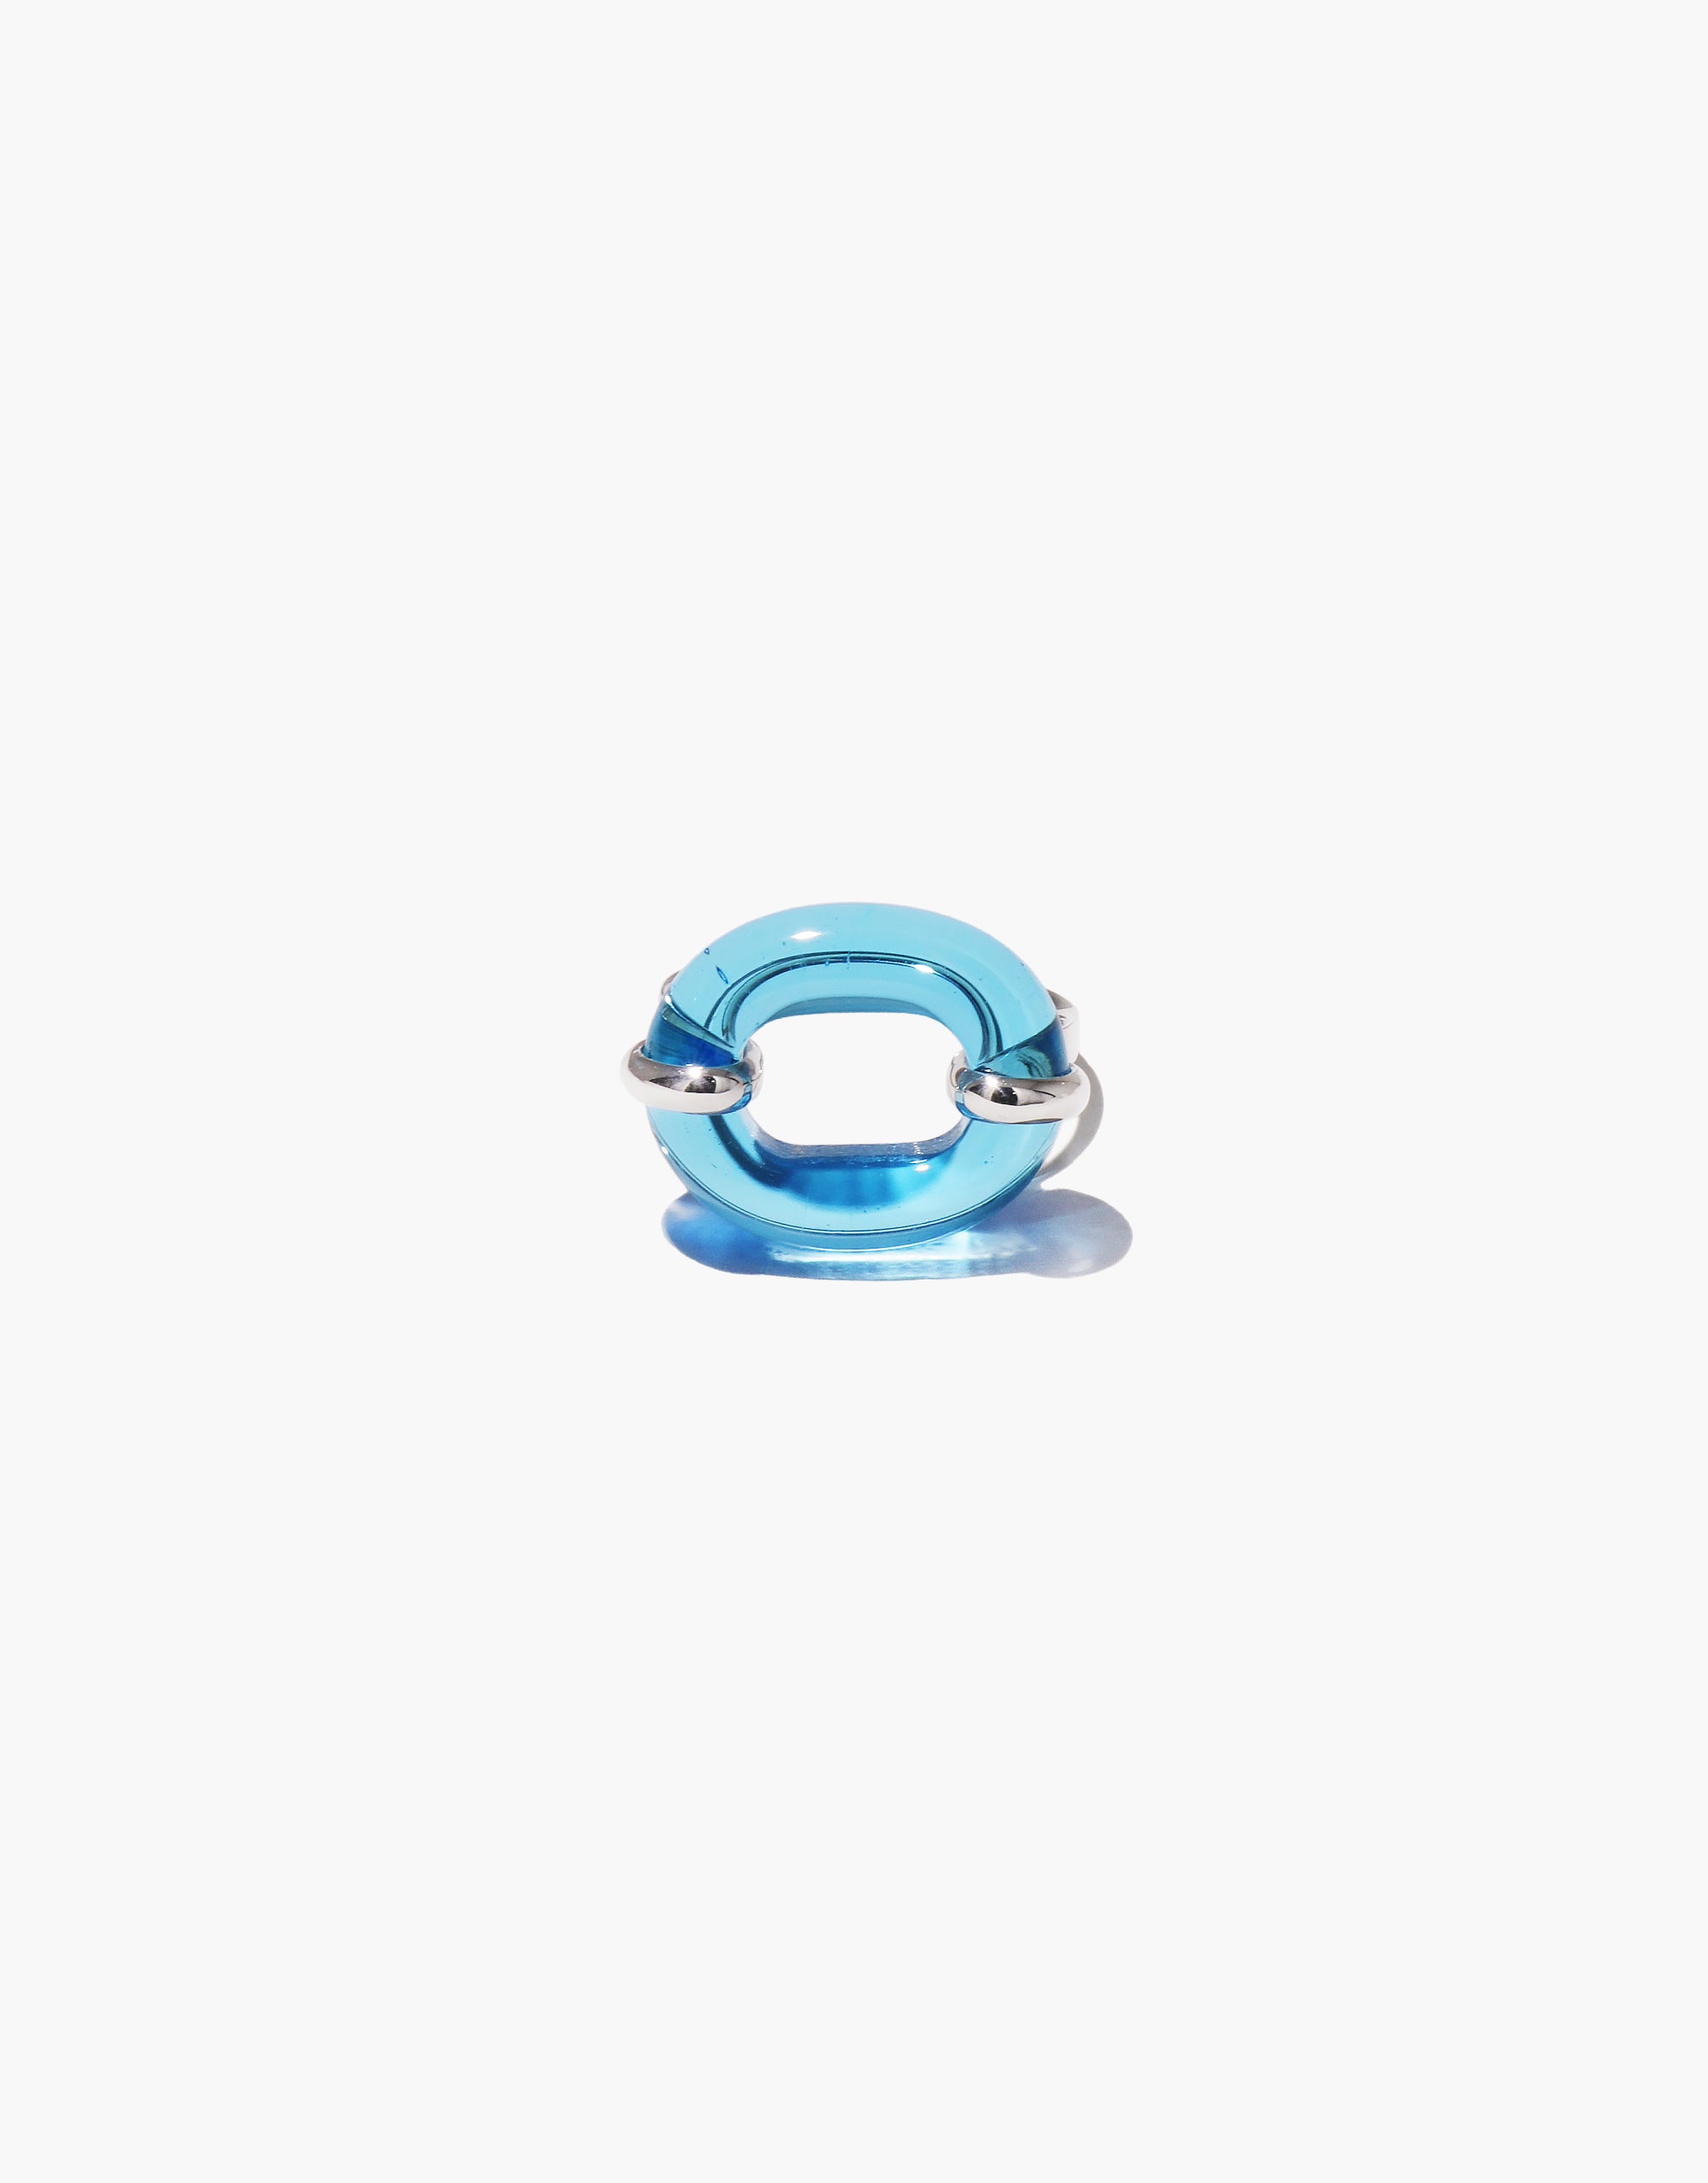 In The Loop Ring | Limited Edition "JOY on York"